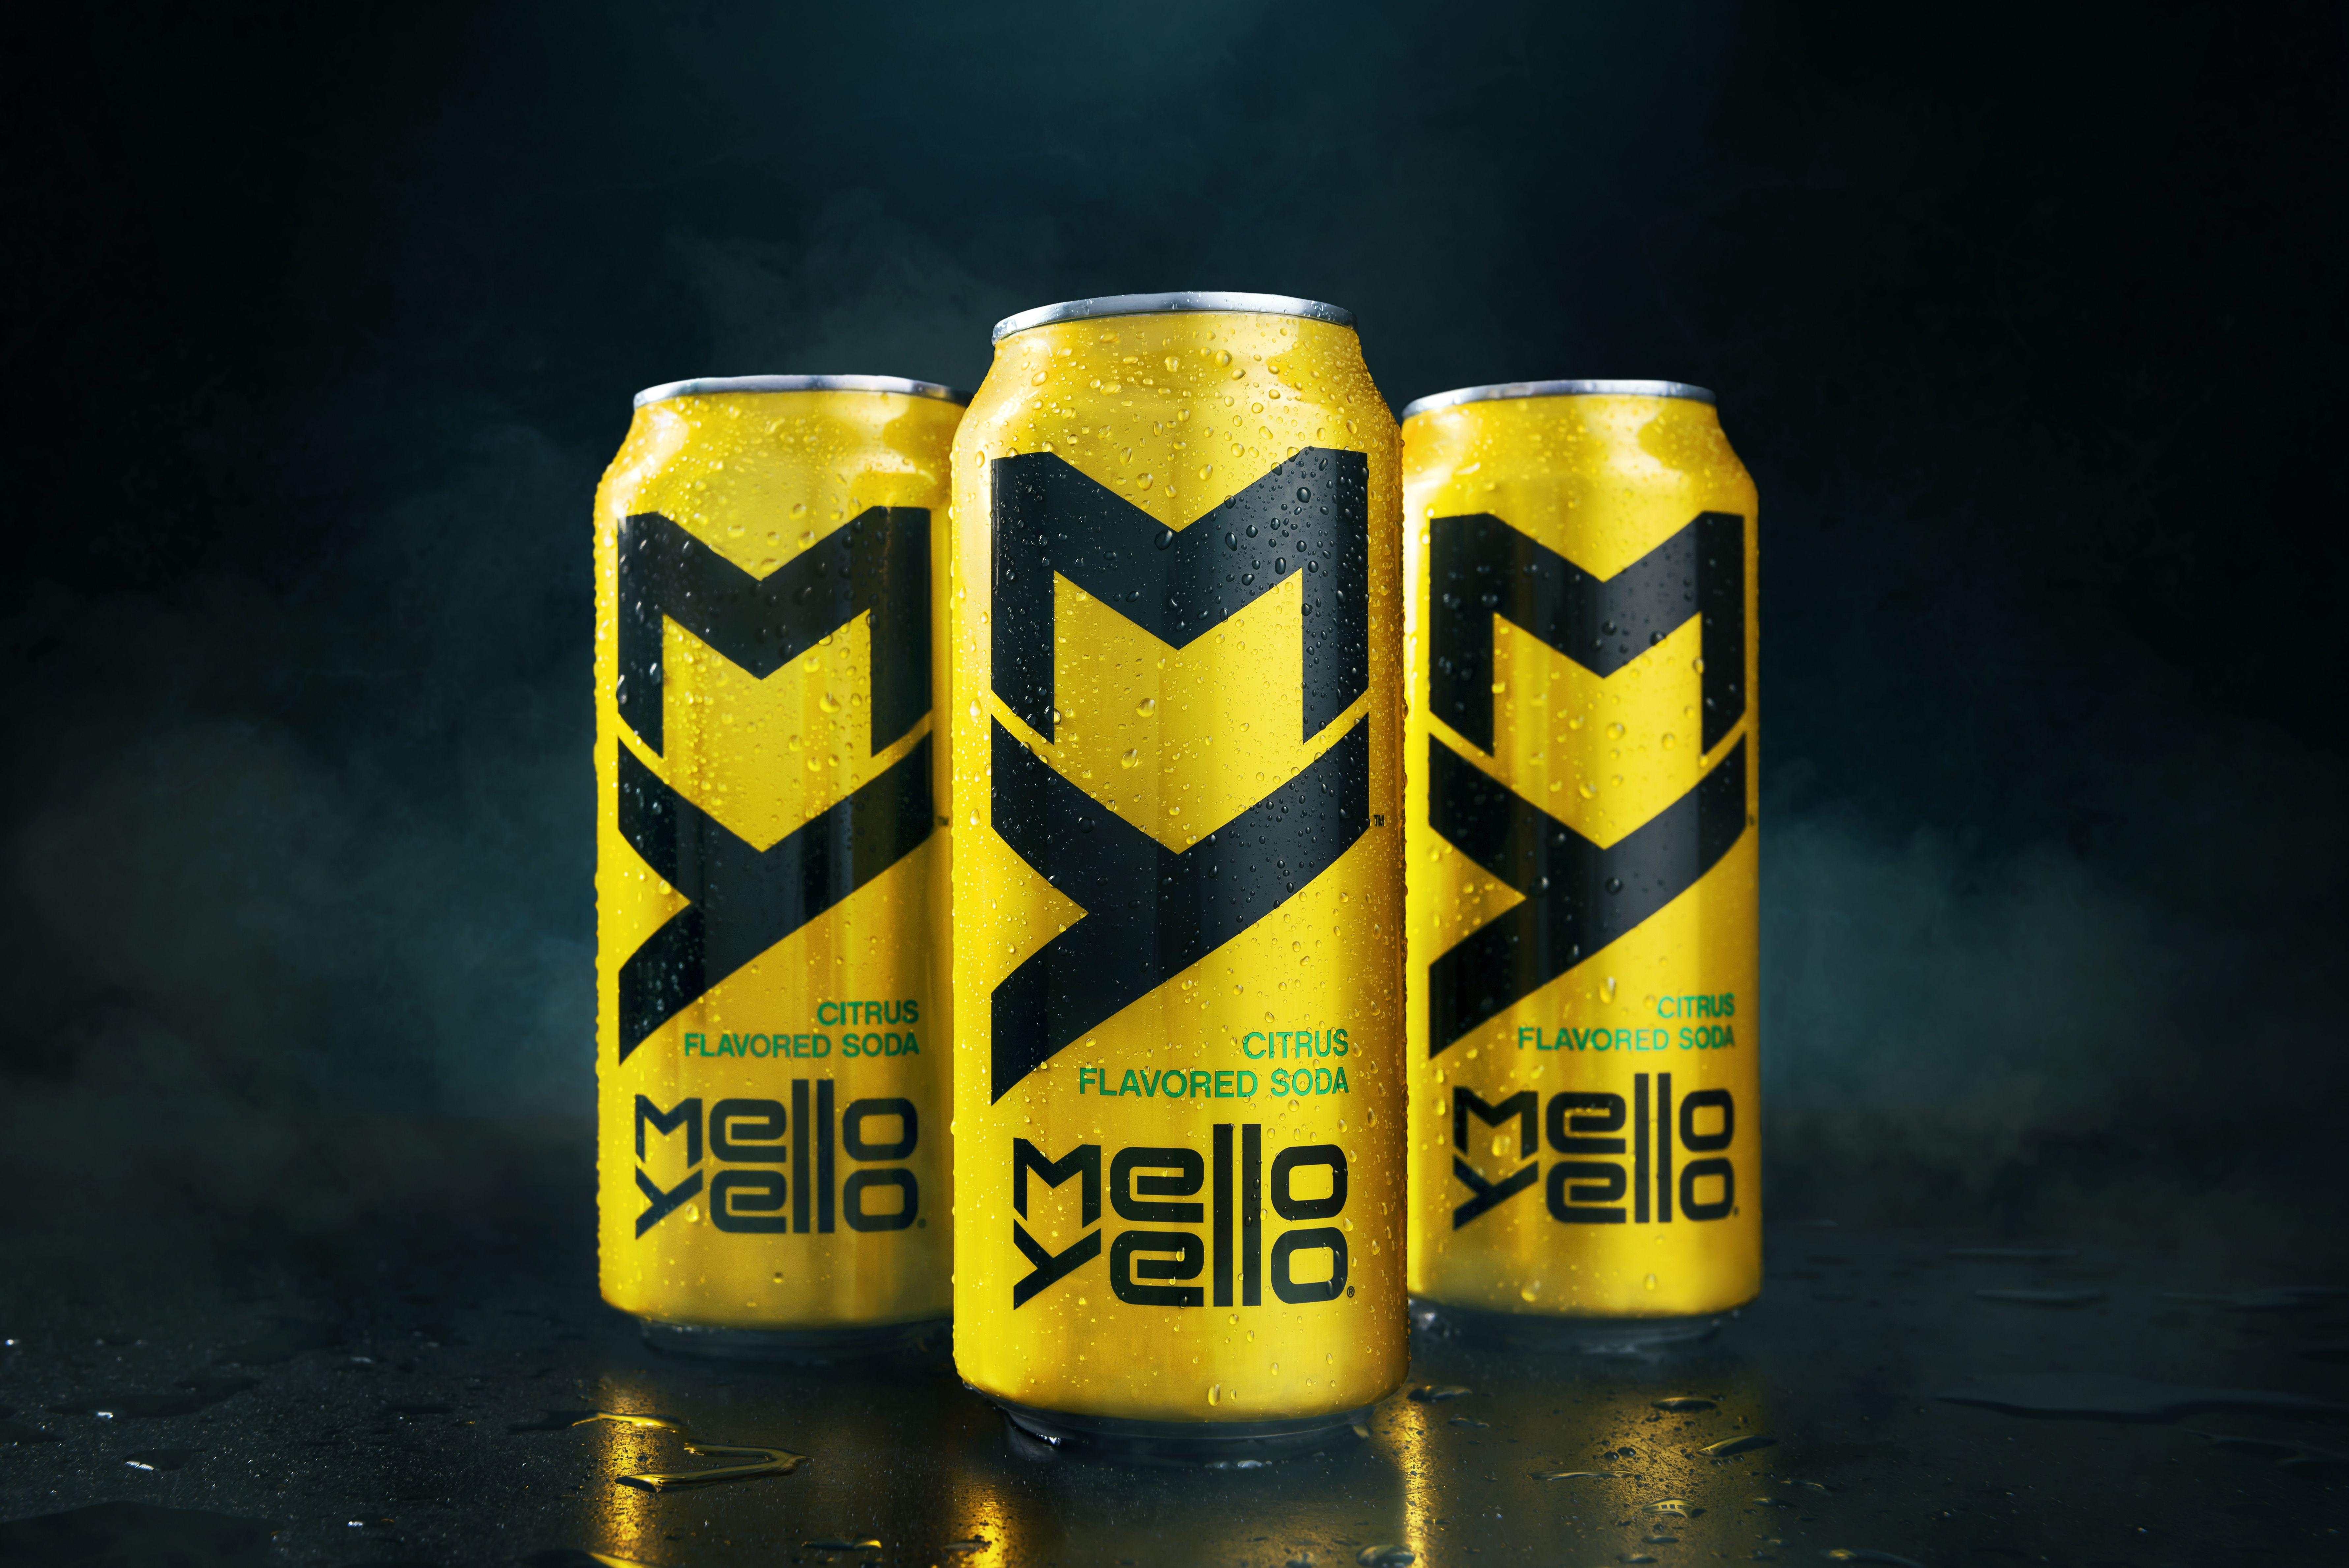 Mello Yello Logo - The New Look of Mello Yello is Anything but Mello | Business Wire